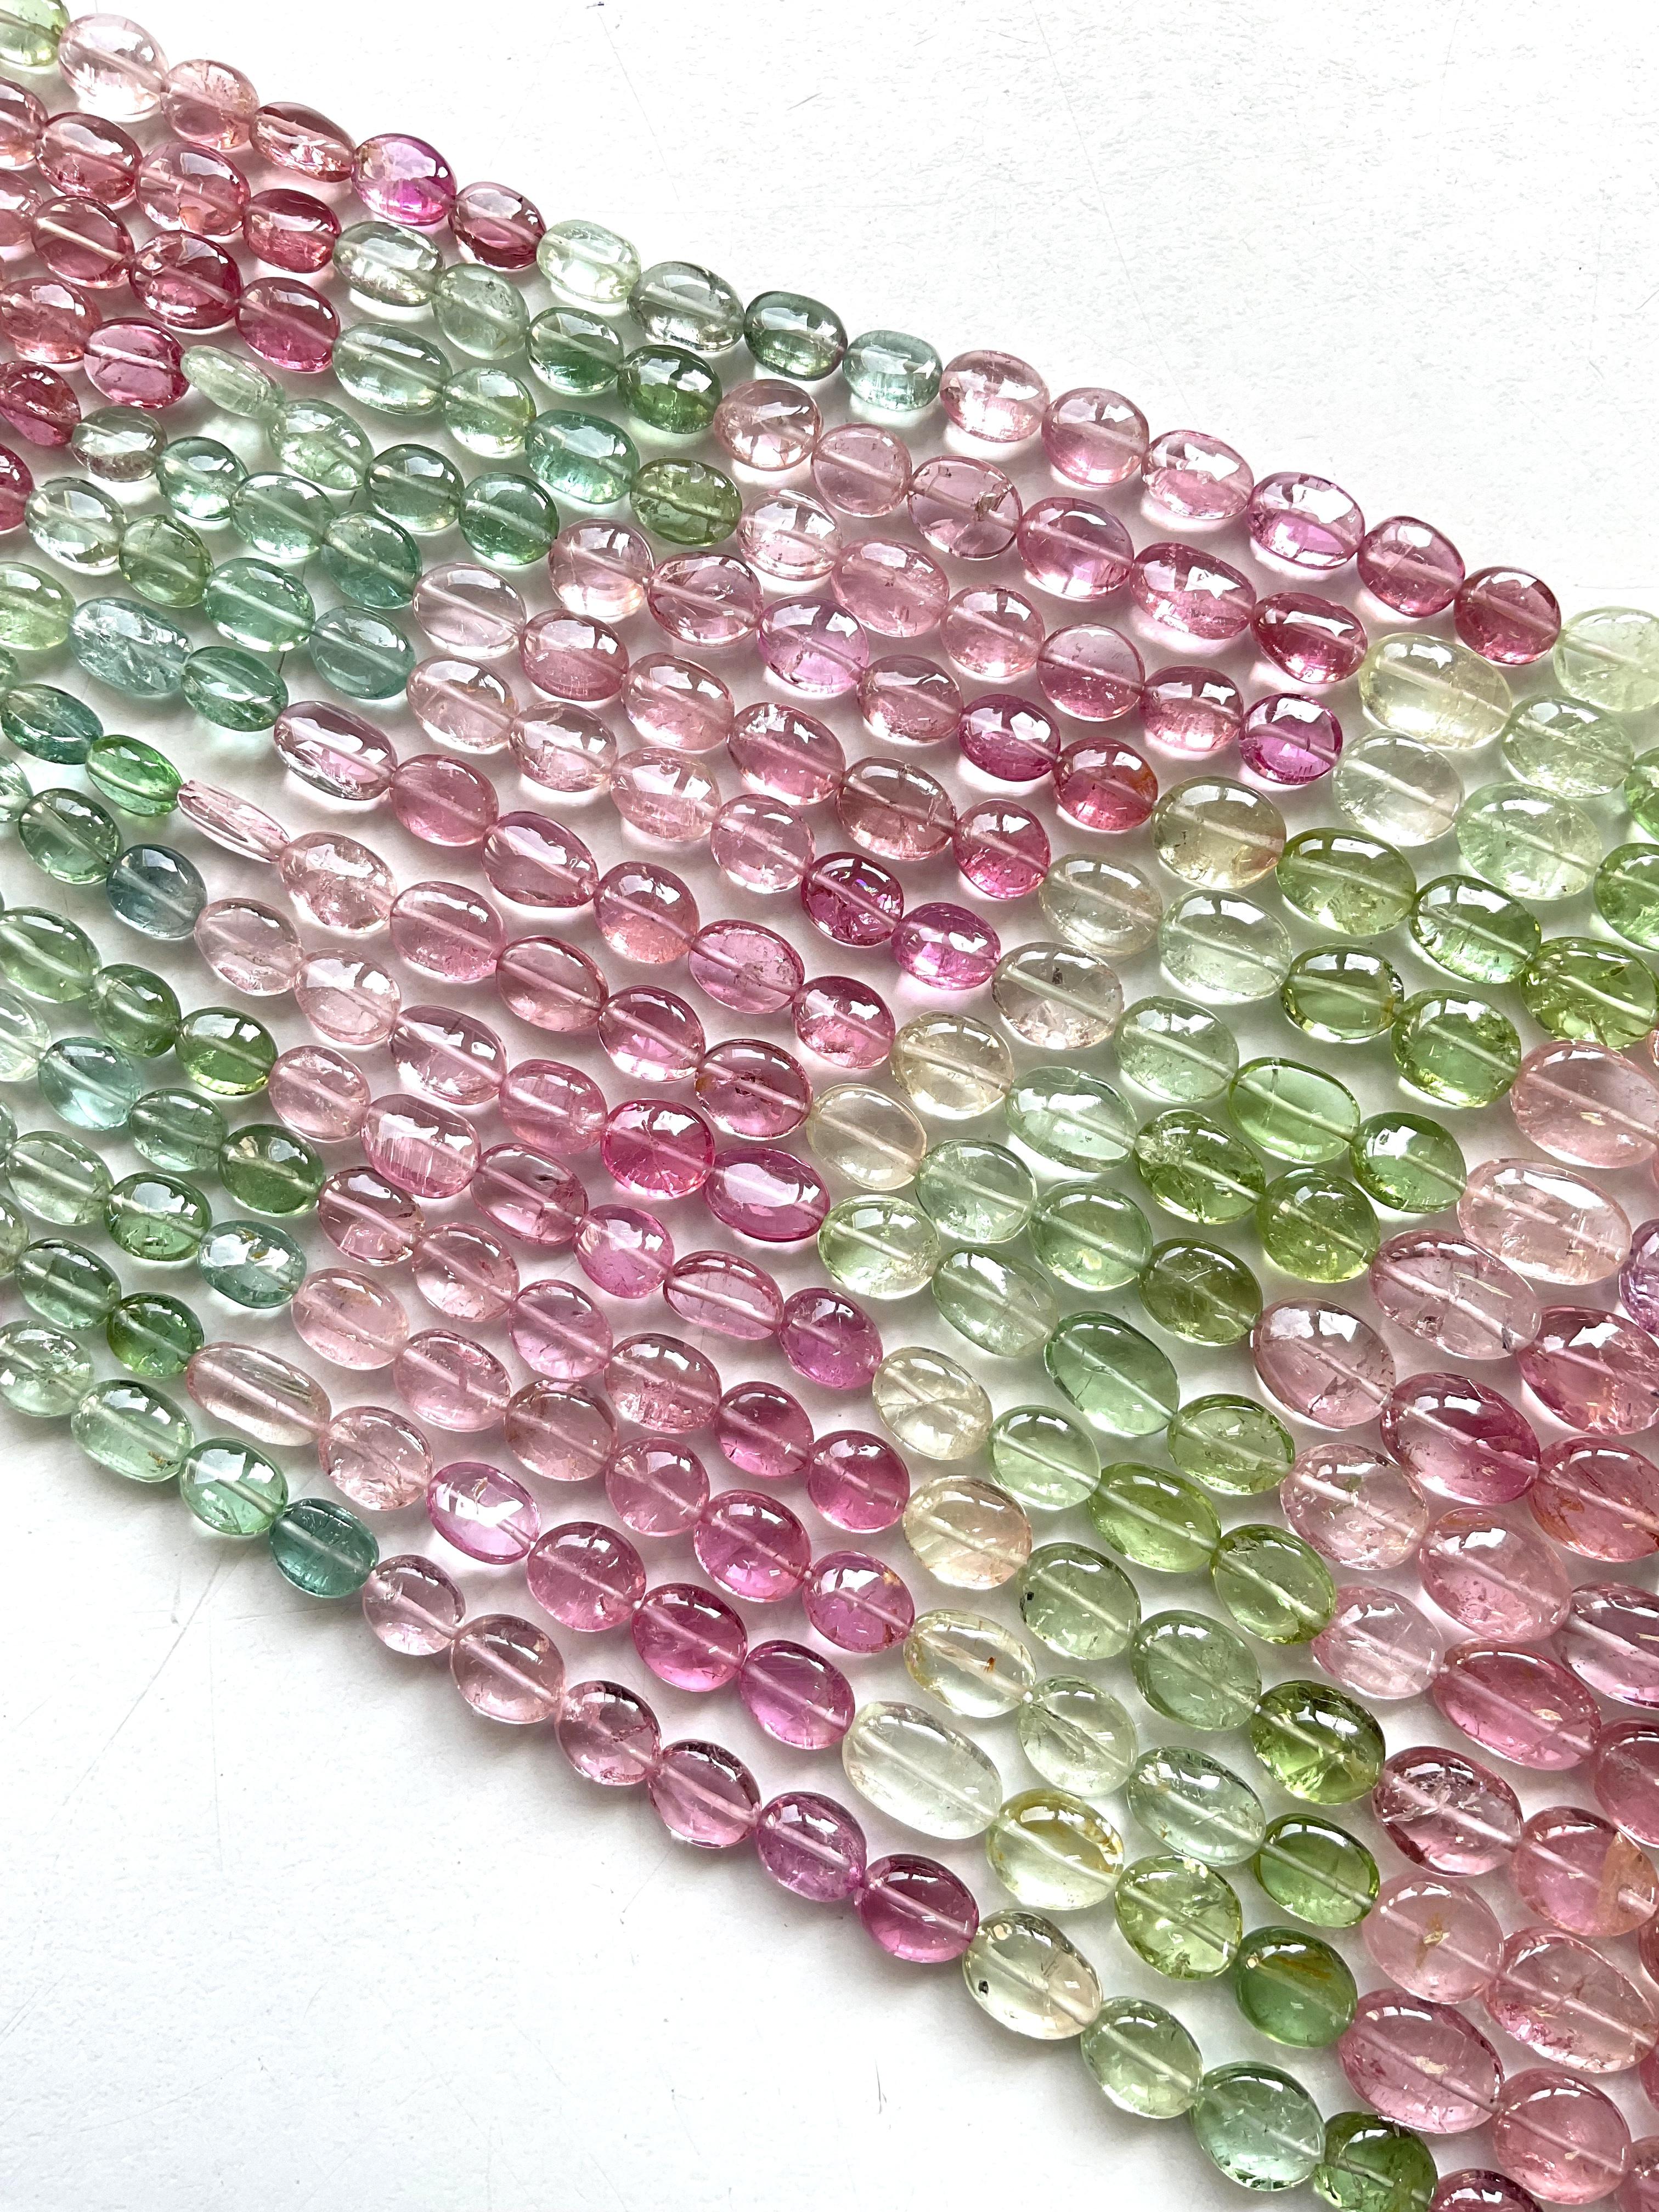 701.65 Carats Tourmaline Multi Tumble Plain Top Fine Quality For Jewelry Gem For Sale 1